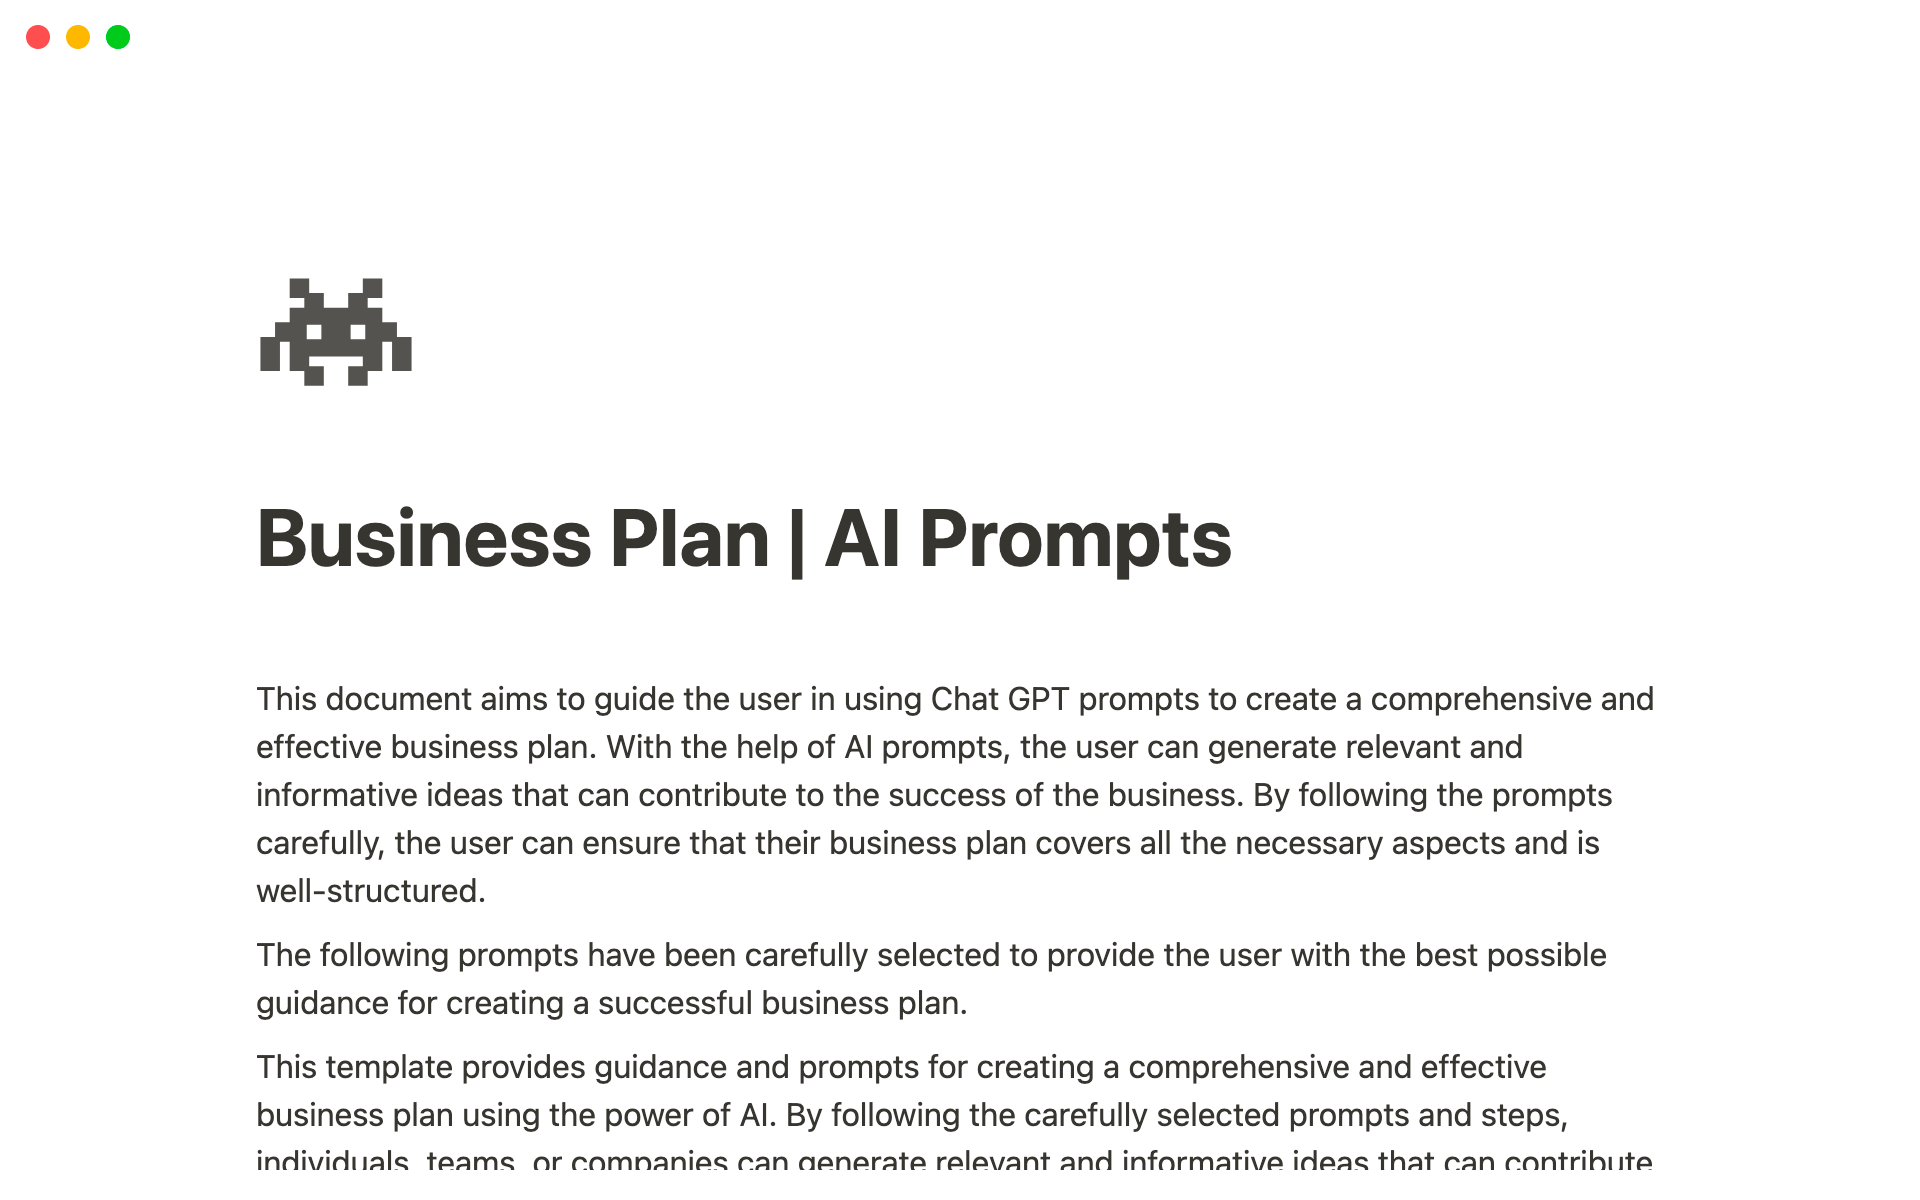 This document aims to guide the user in using Chat GPT prompts to create a comprehensive and effective business plan.